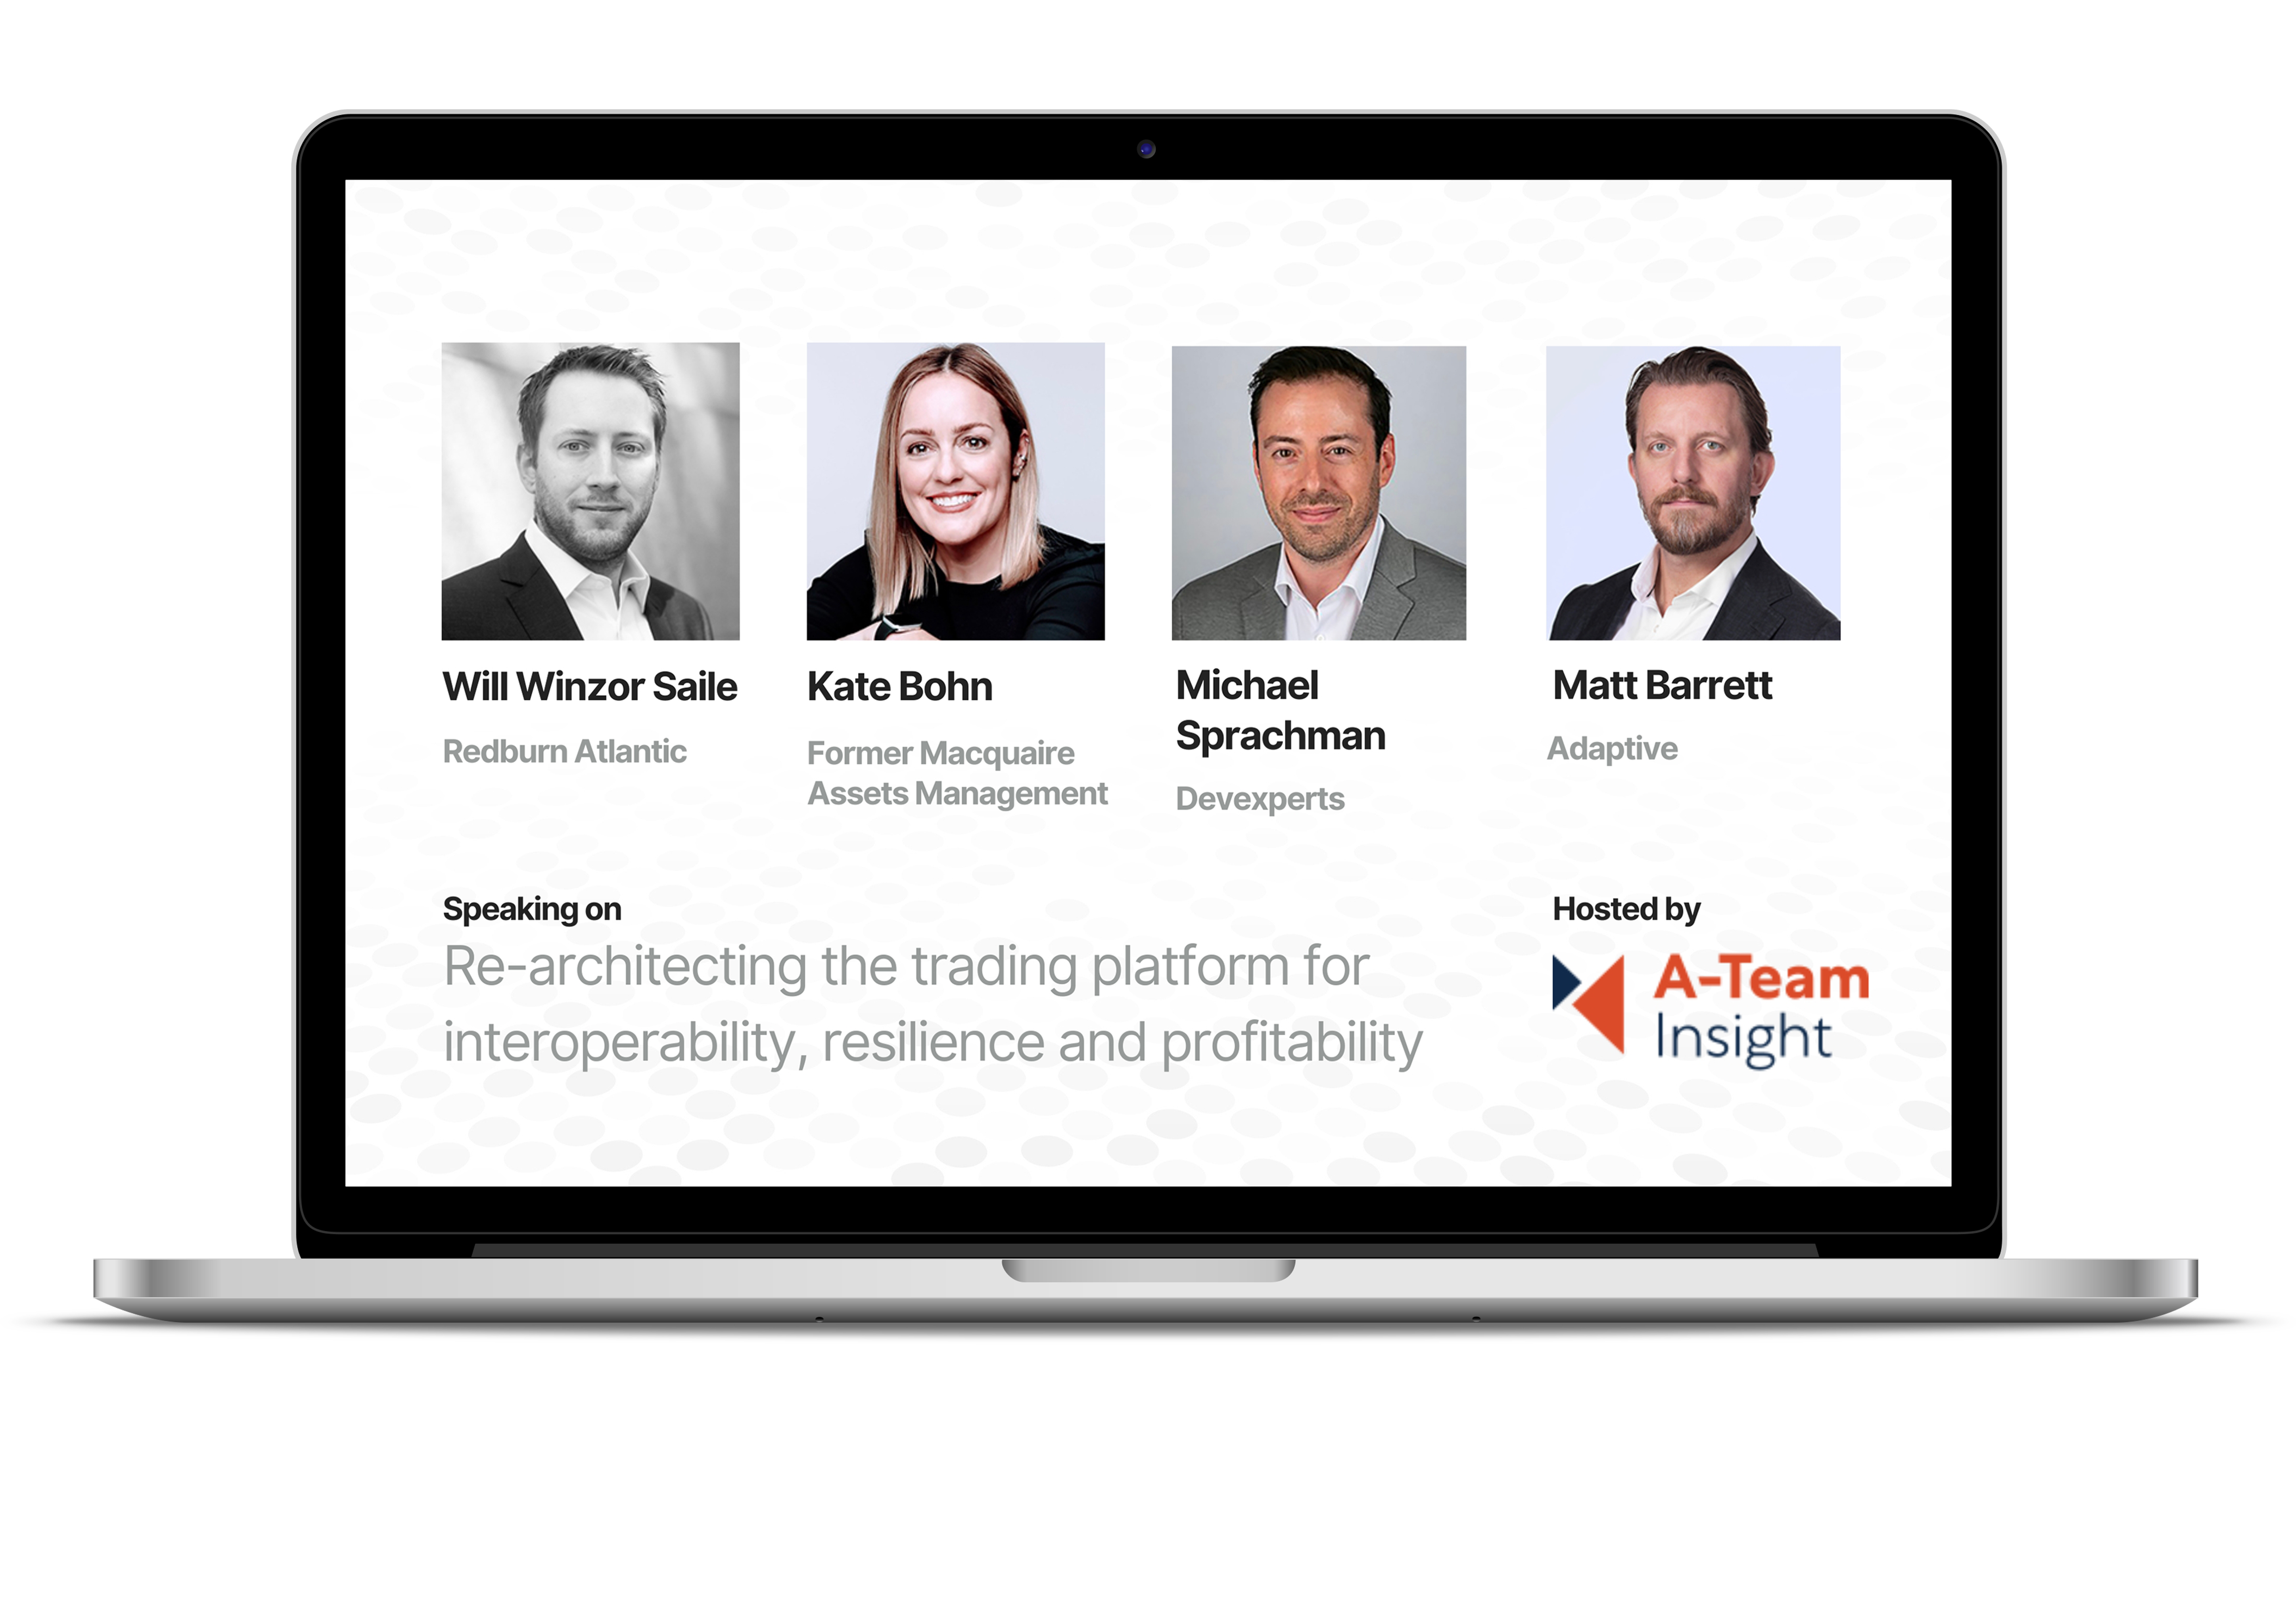 Adaptive Webinar Hosted by A-Team - Re-architecting the trading platform for interoperability, resilience and profitability